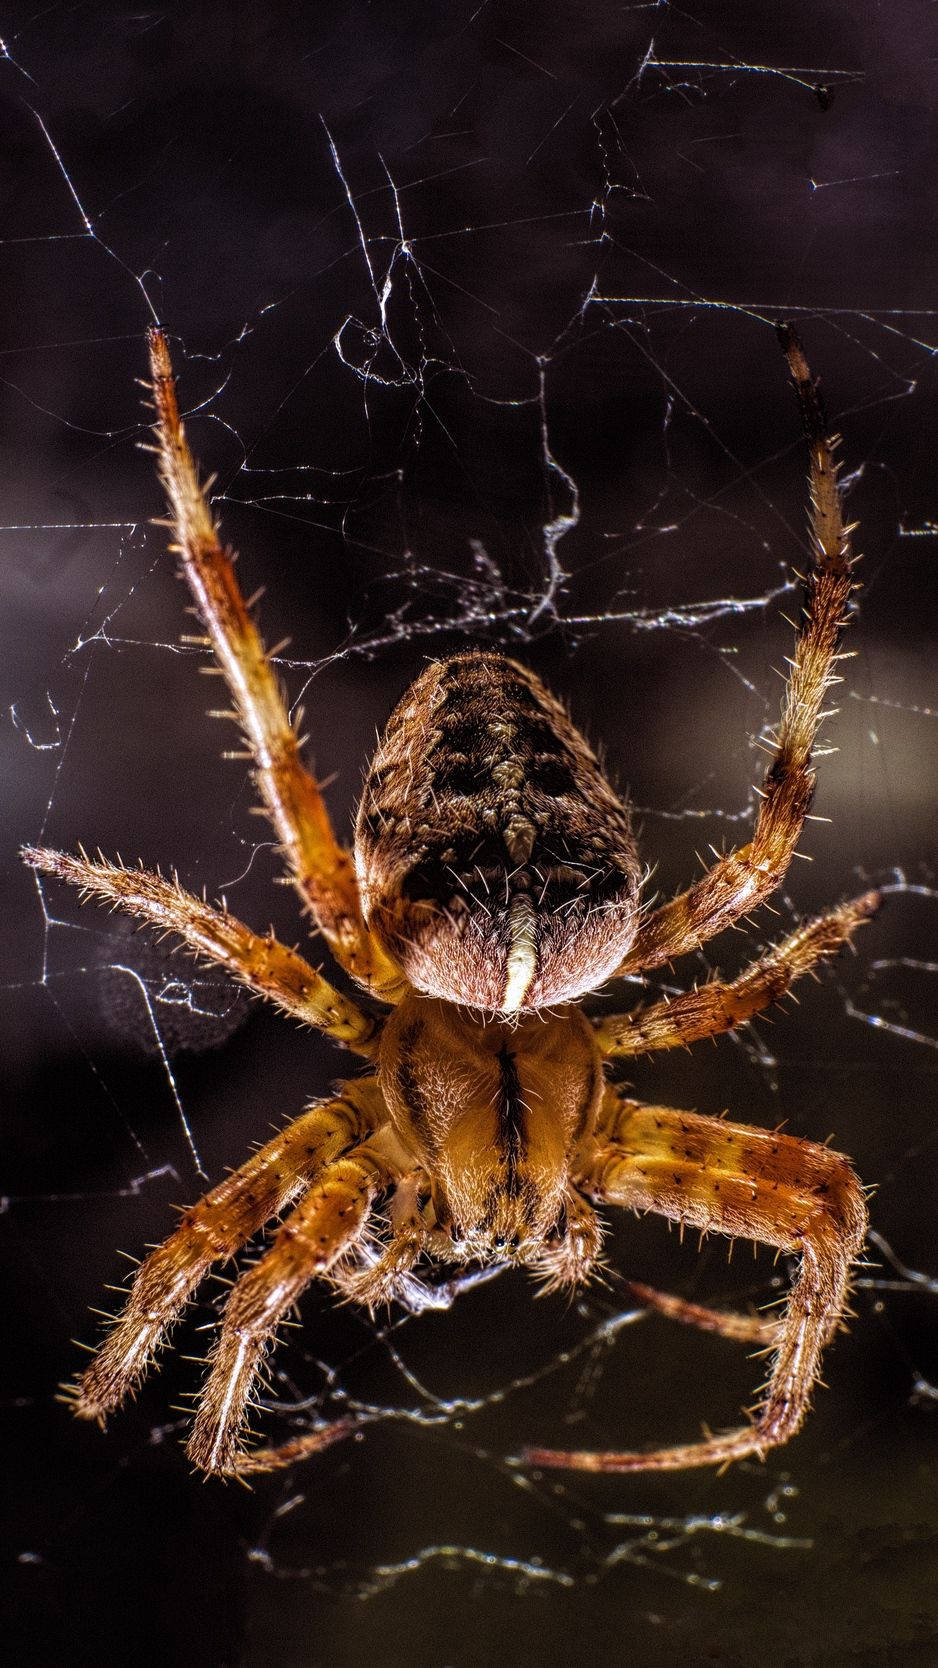 Spider Covered In Microscopic Hairs